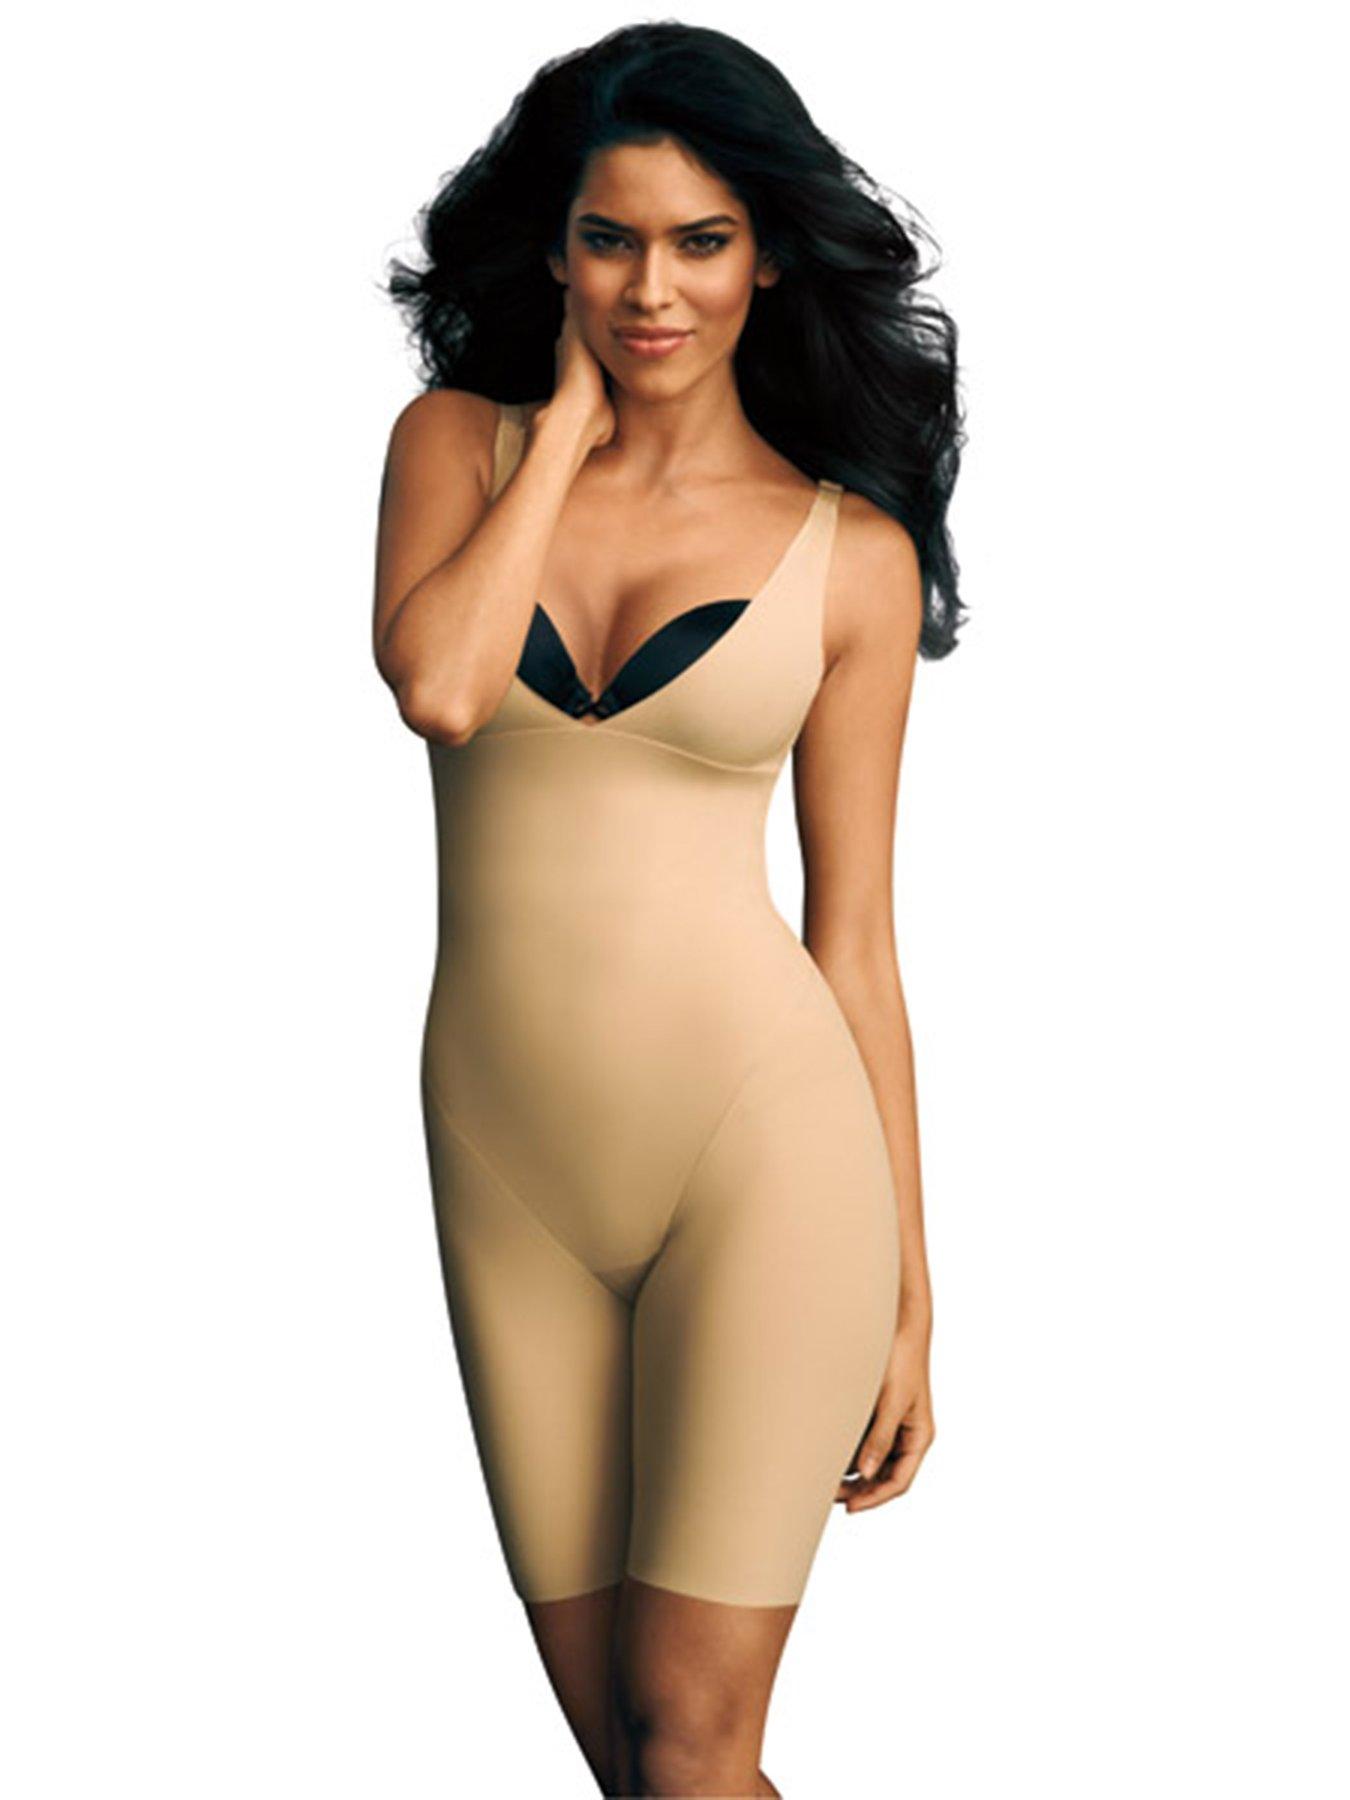 Maidenform Flexees Women's Fit Sense All-In-One Shaping